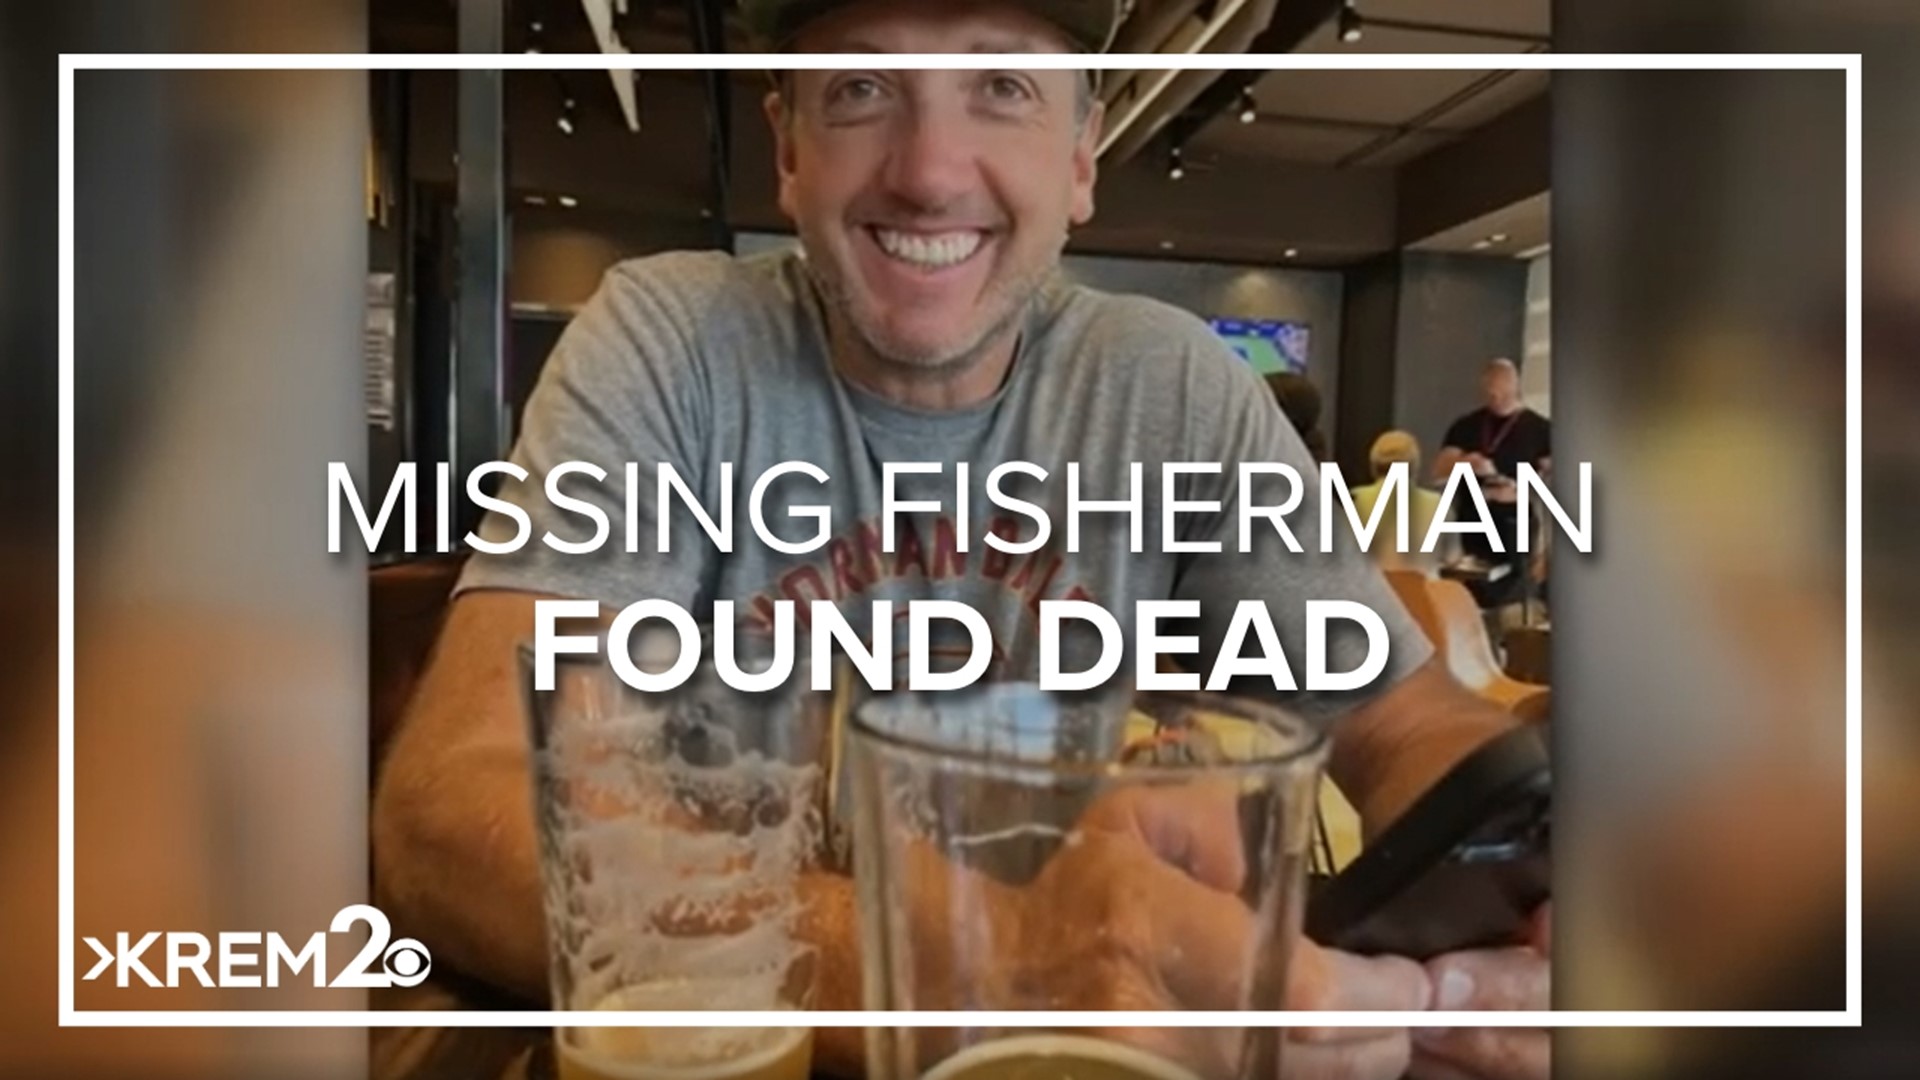 51-year-old Eric Lee Jensen reportedly went missing on Friday, February 9. His remains were found by the National Park Service a week later on Friday, February 16.